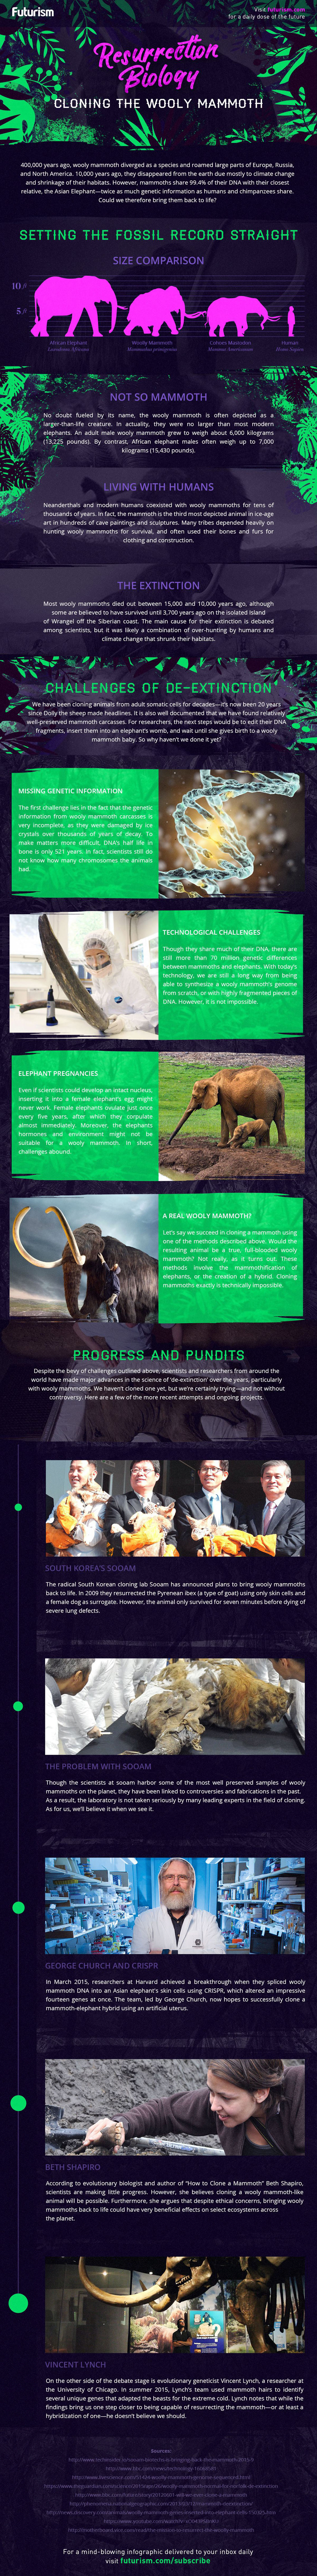 Resurrection Biology Cloning Woolly Mammoth infographic